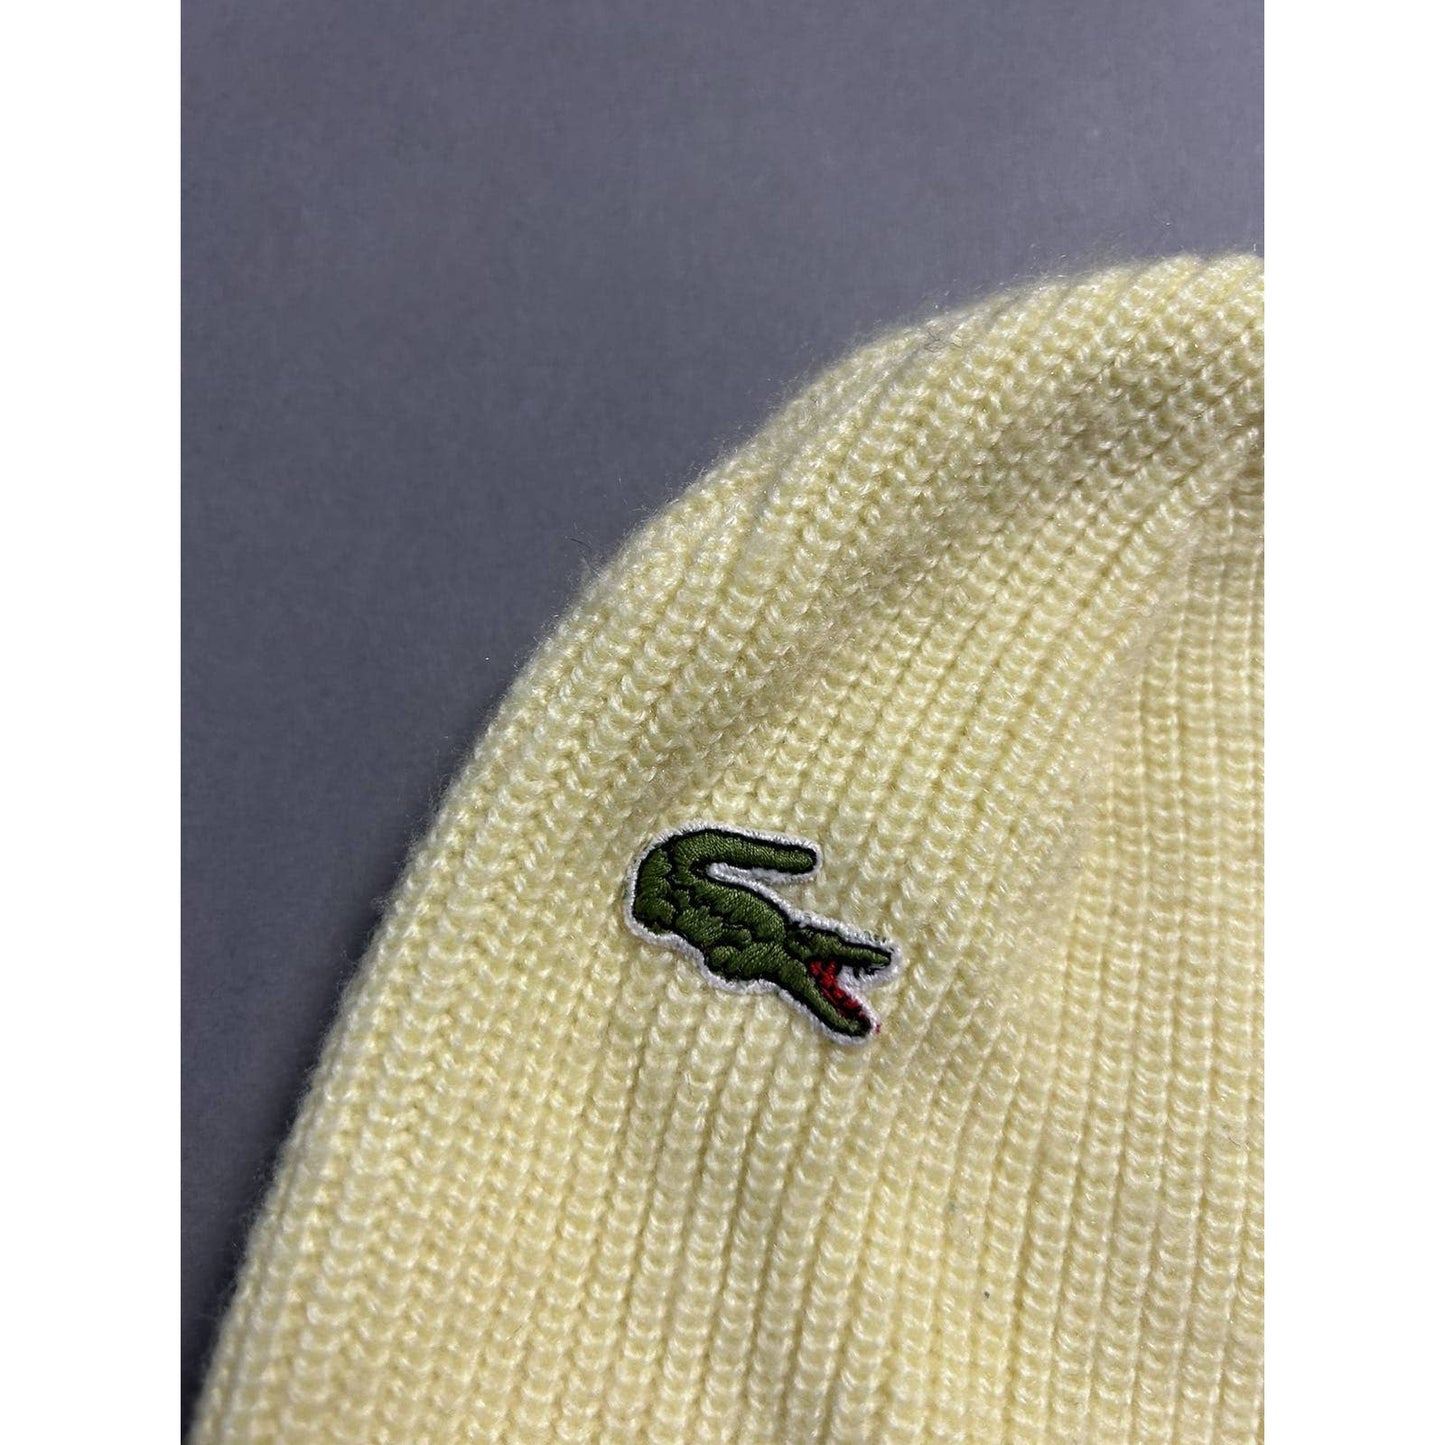 Vintage Lacoste Beanie Hat Made in France yellow